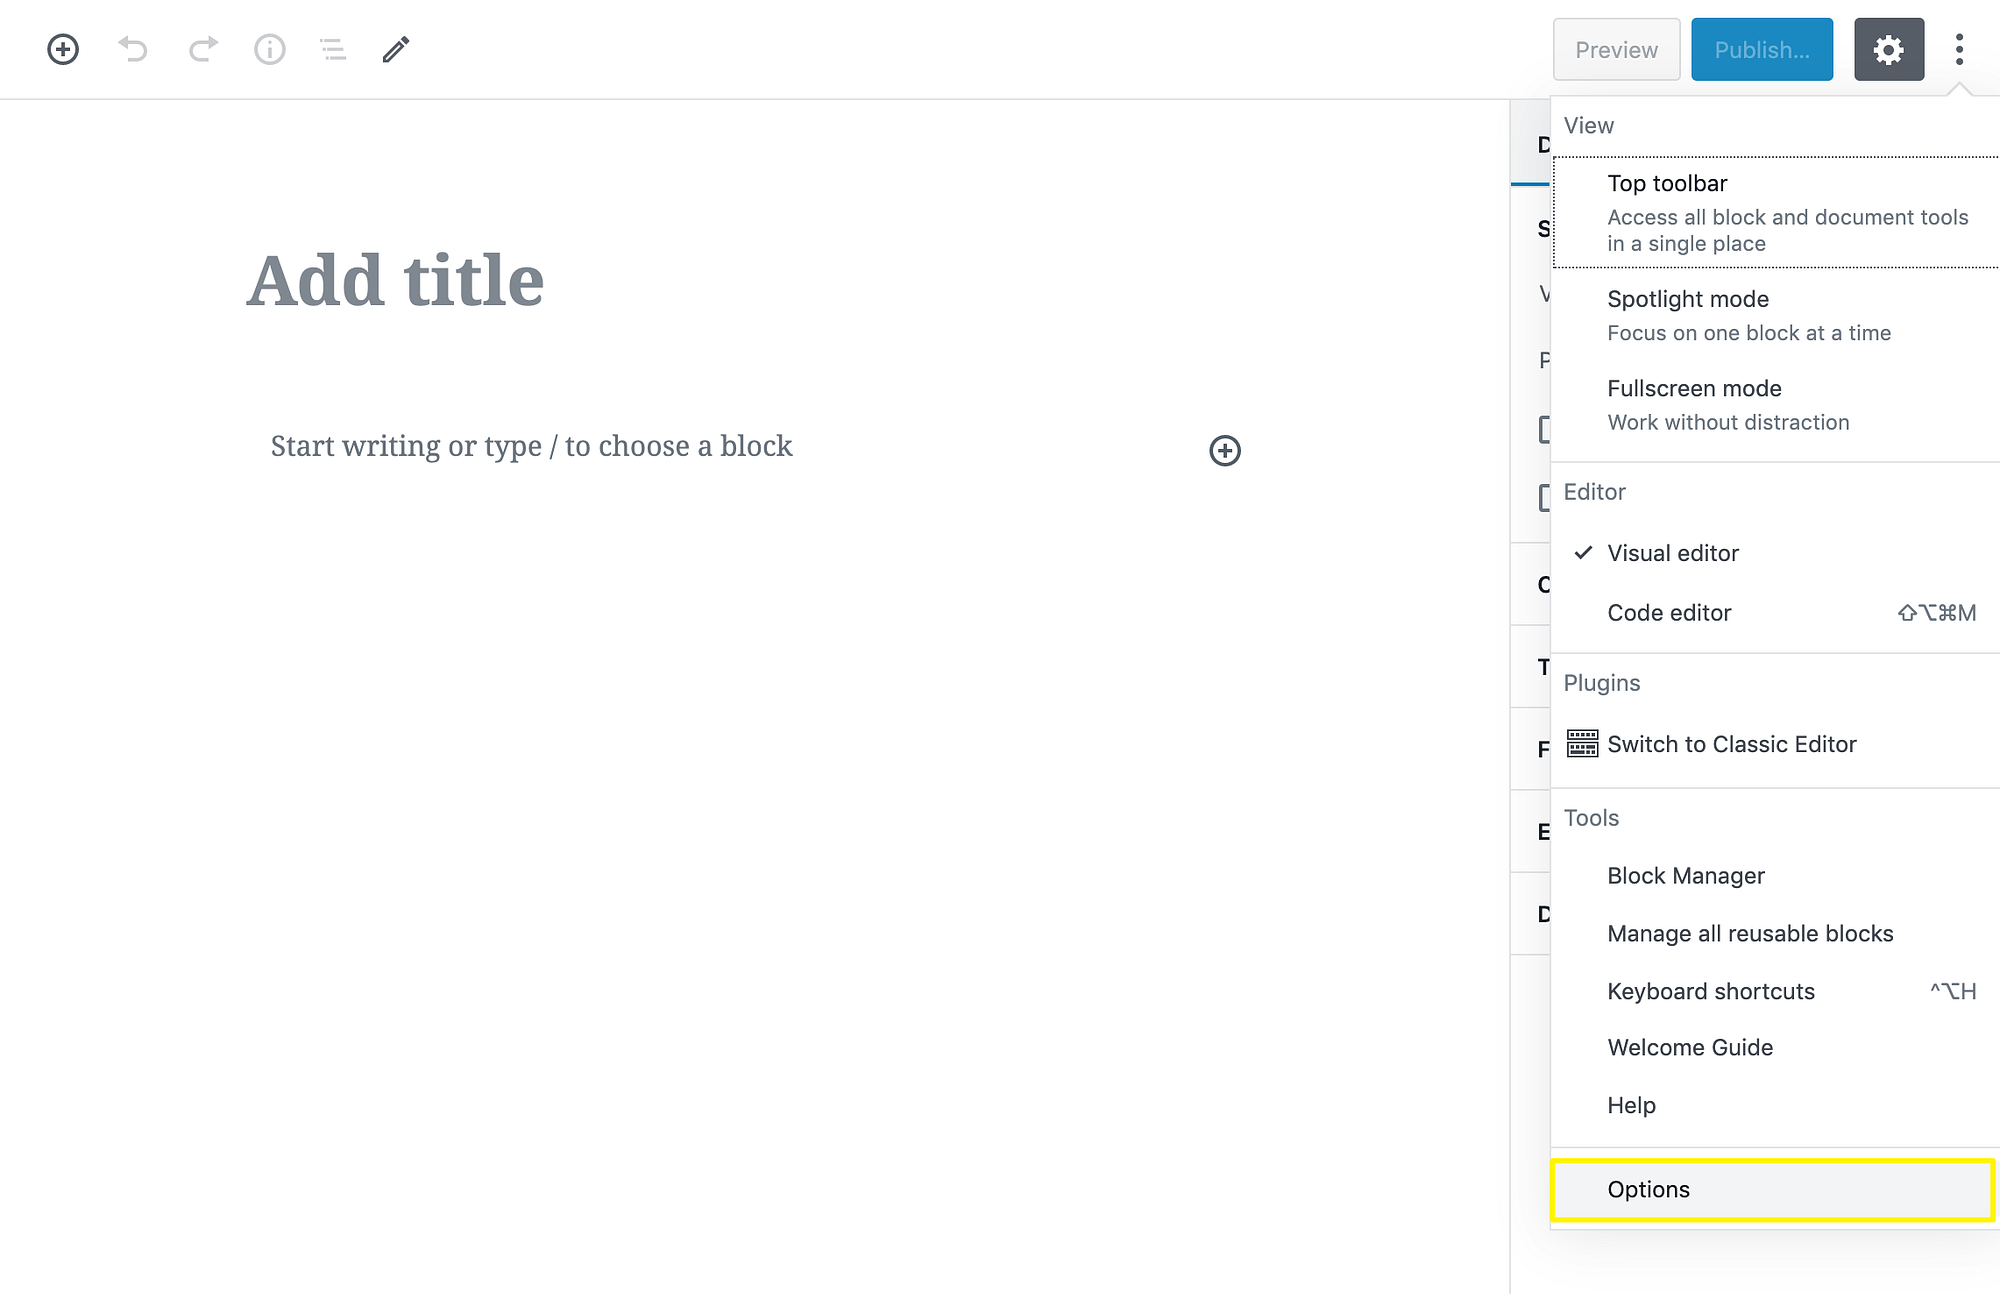 Opening the Block Editor options.